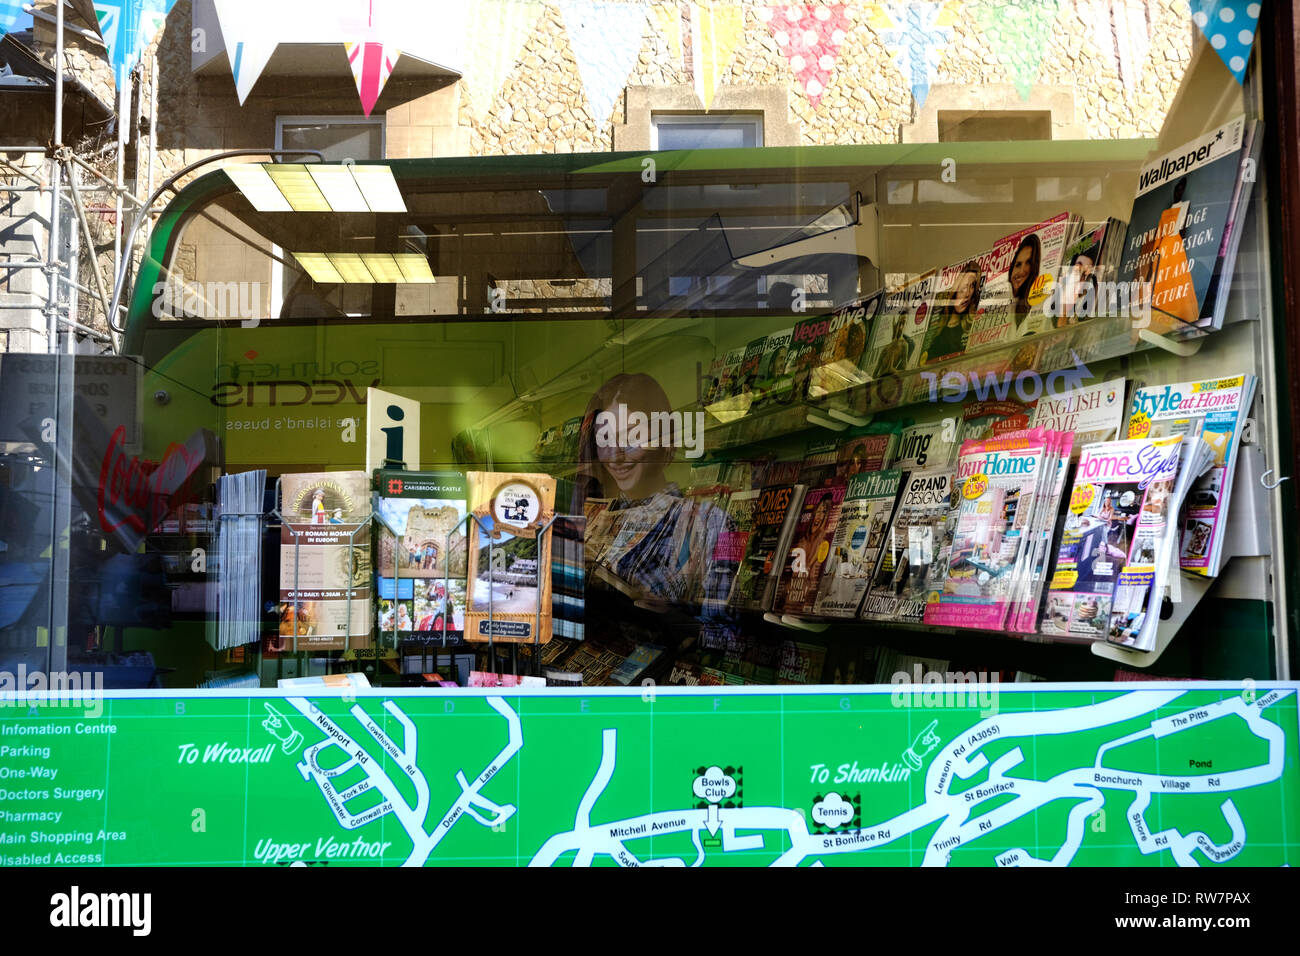 Reflections in a shop window, showing a Southern Vectis double decker bus and the magazine rack of a local newsagents in Ventnor, Isle of Wight, UK. Stock Photo